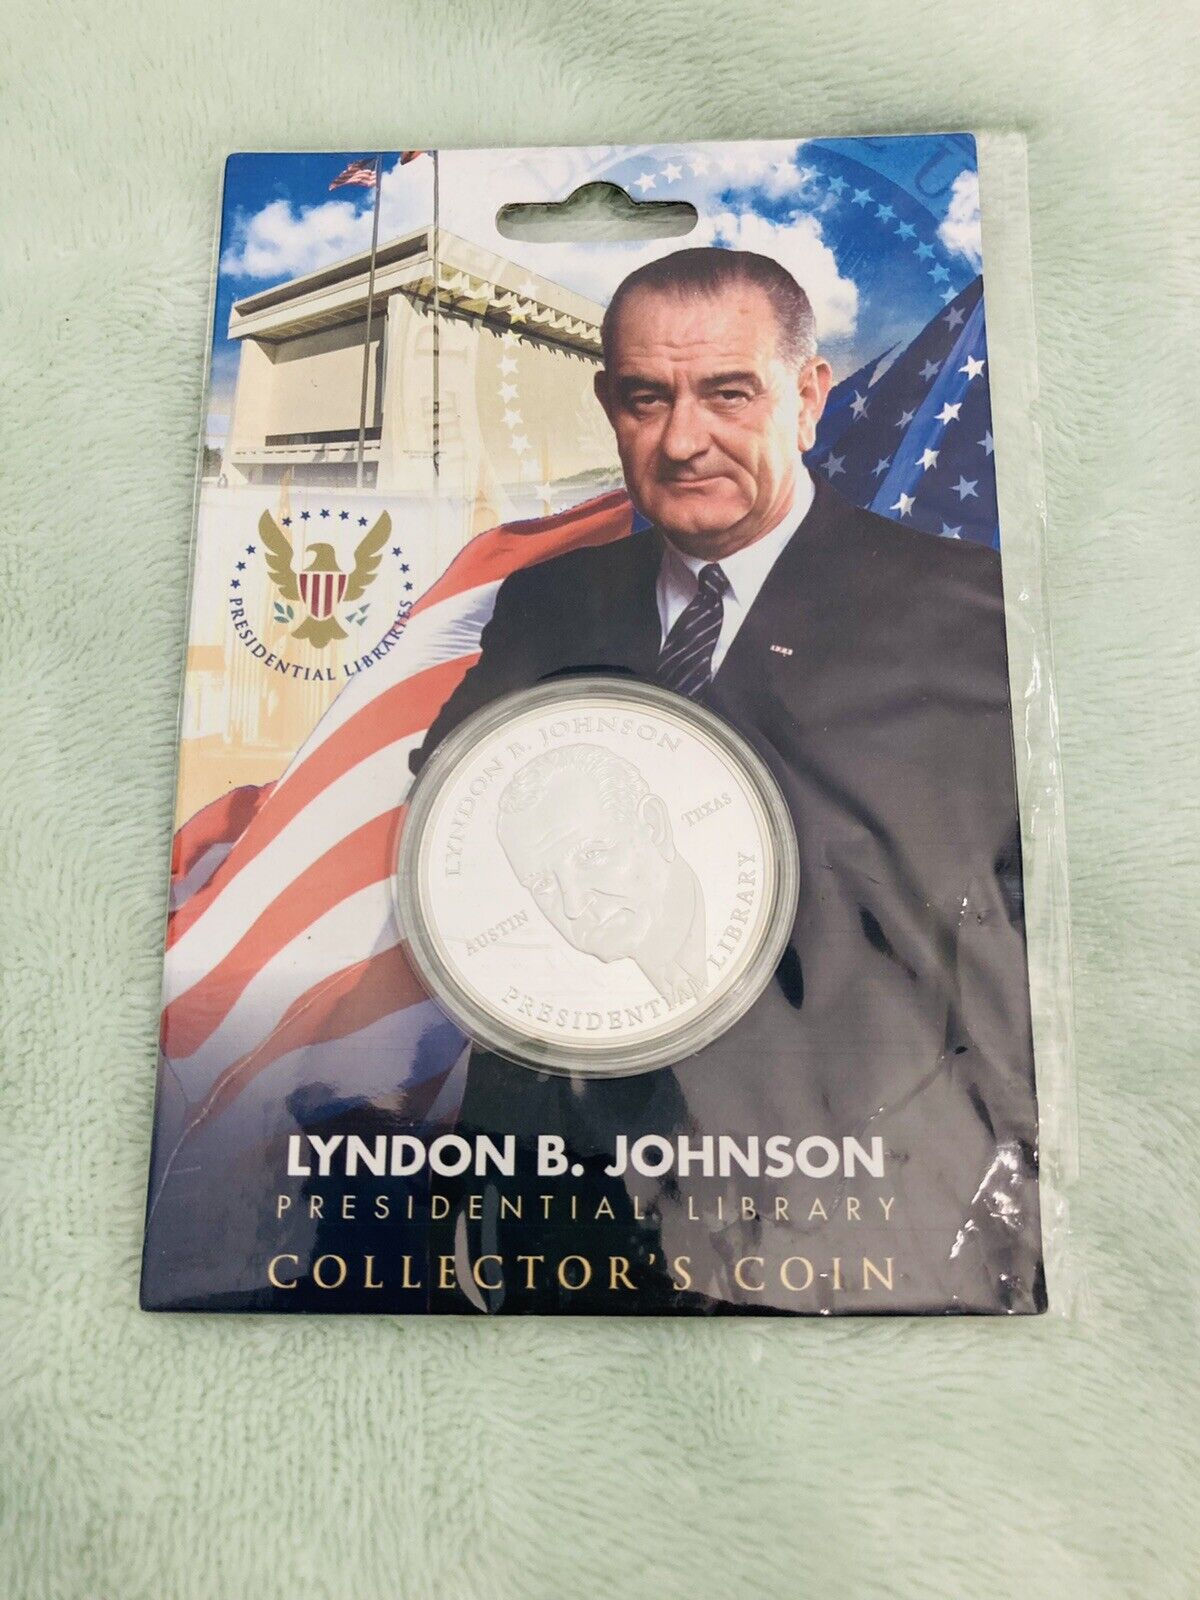 Lyndon B. Johnson - Presidential Library Collector’s Coin in Original Package